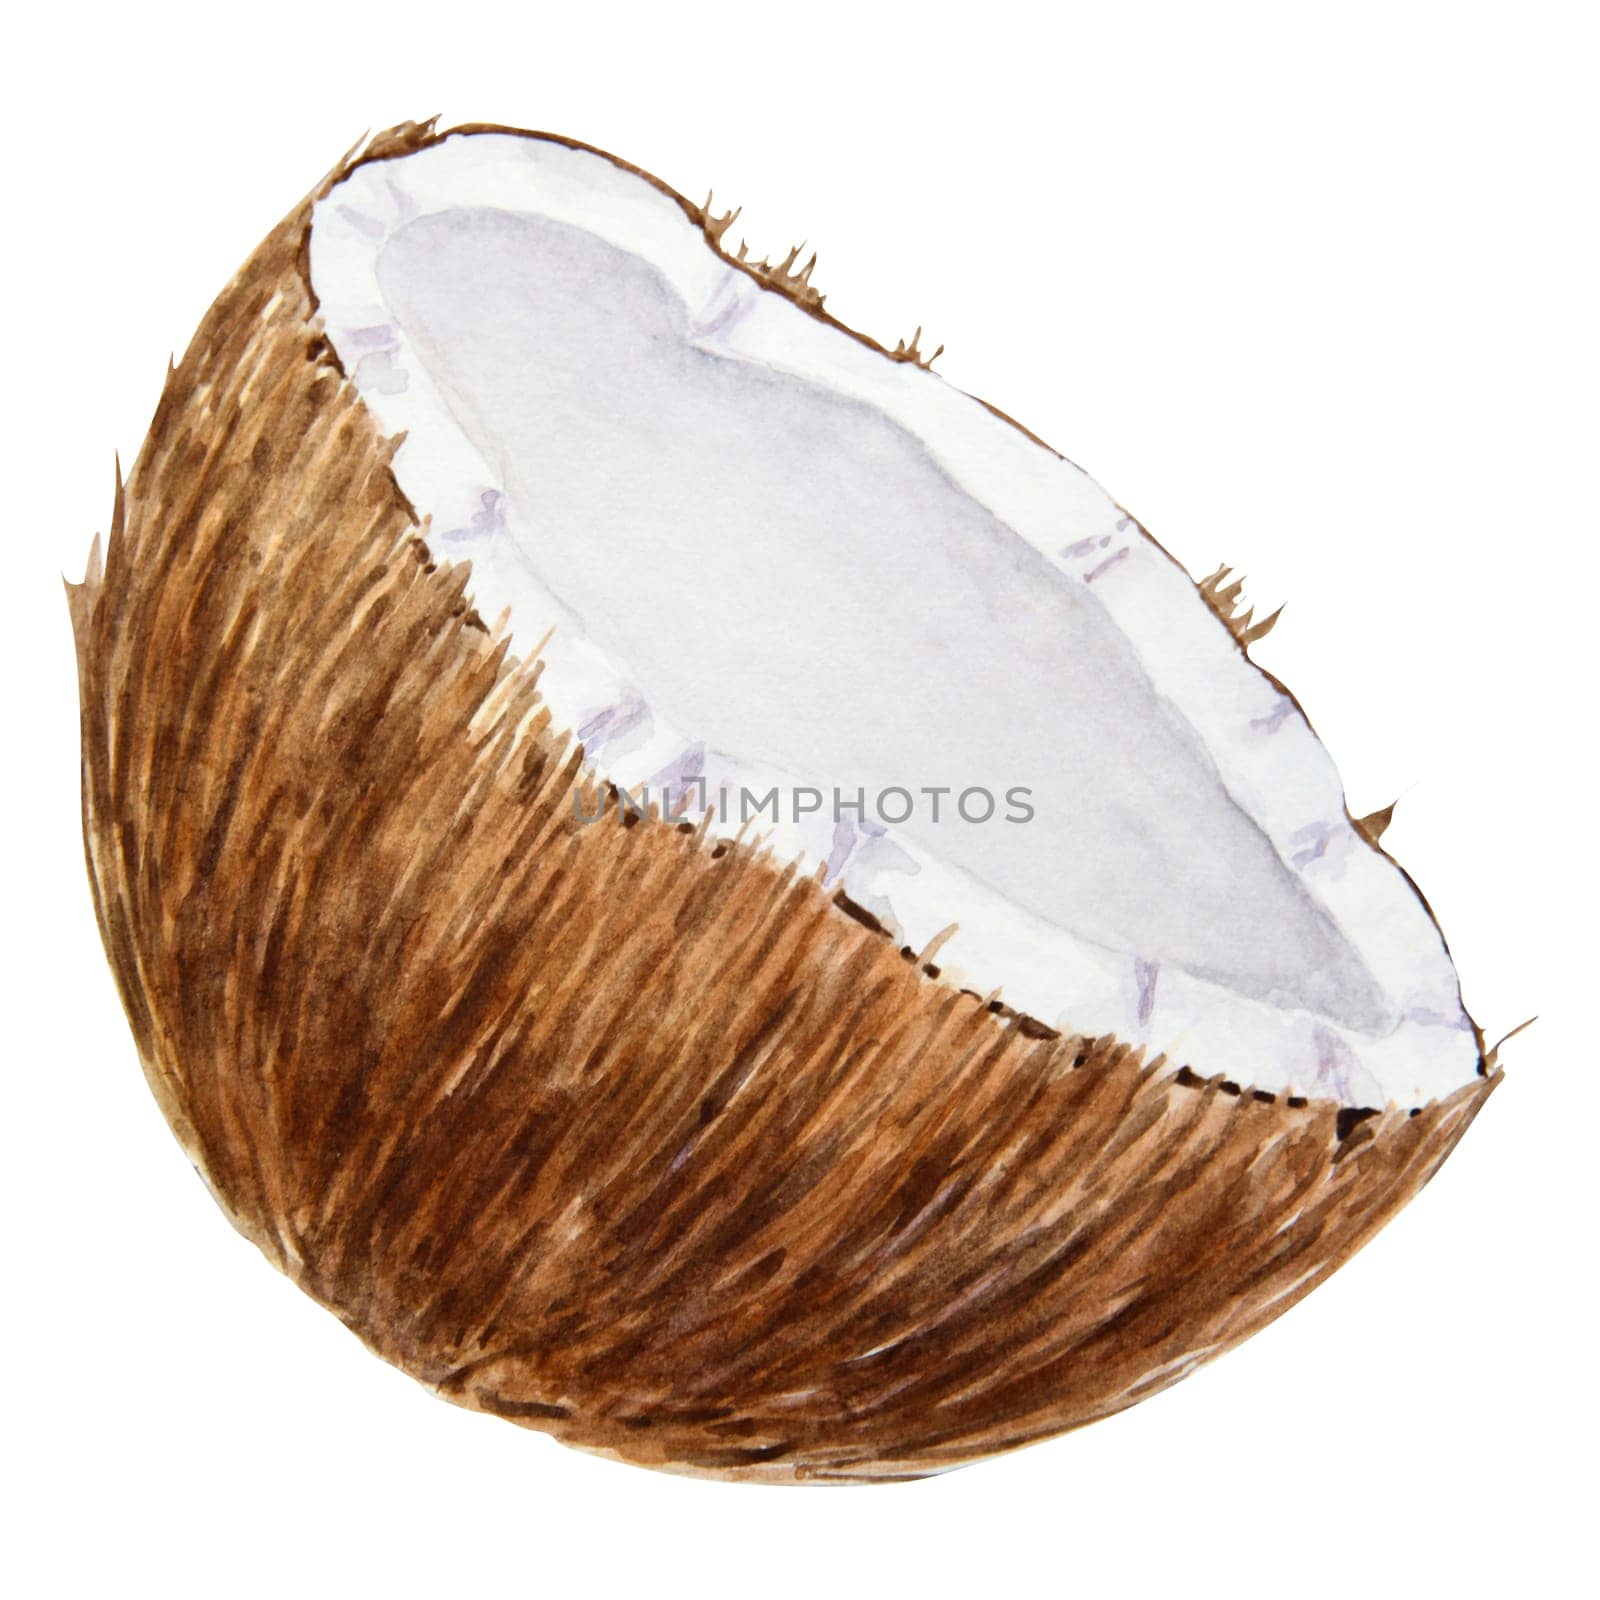 Half a broken coconut. Tropical botanical hand drawn watercolor illustration isolated on white. Exotic object for travel, spa, relax, beauty business design. Ingredient of dishes, cocktails, drinks by florainlove_art